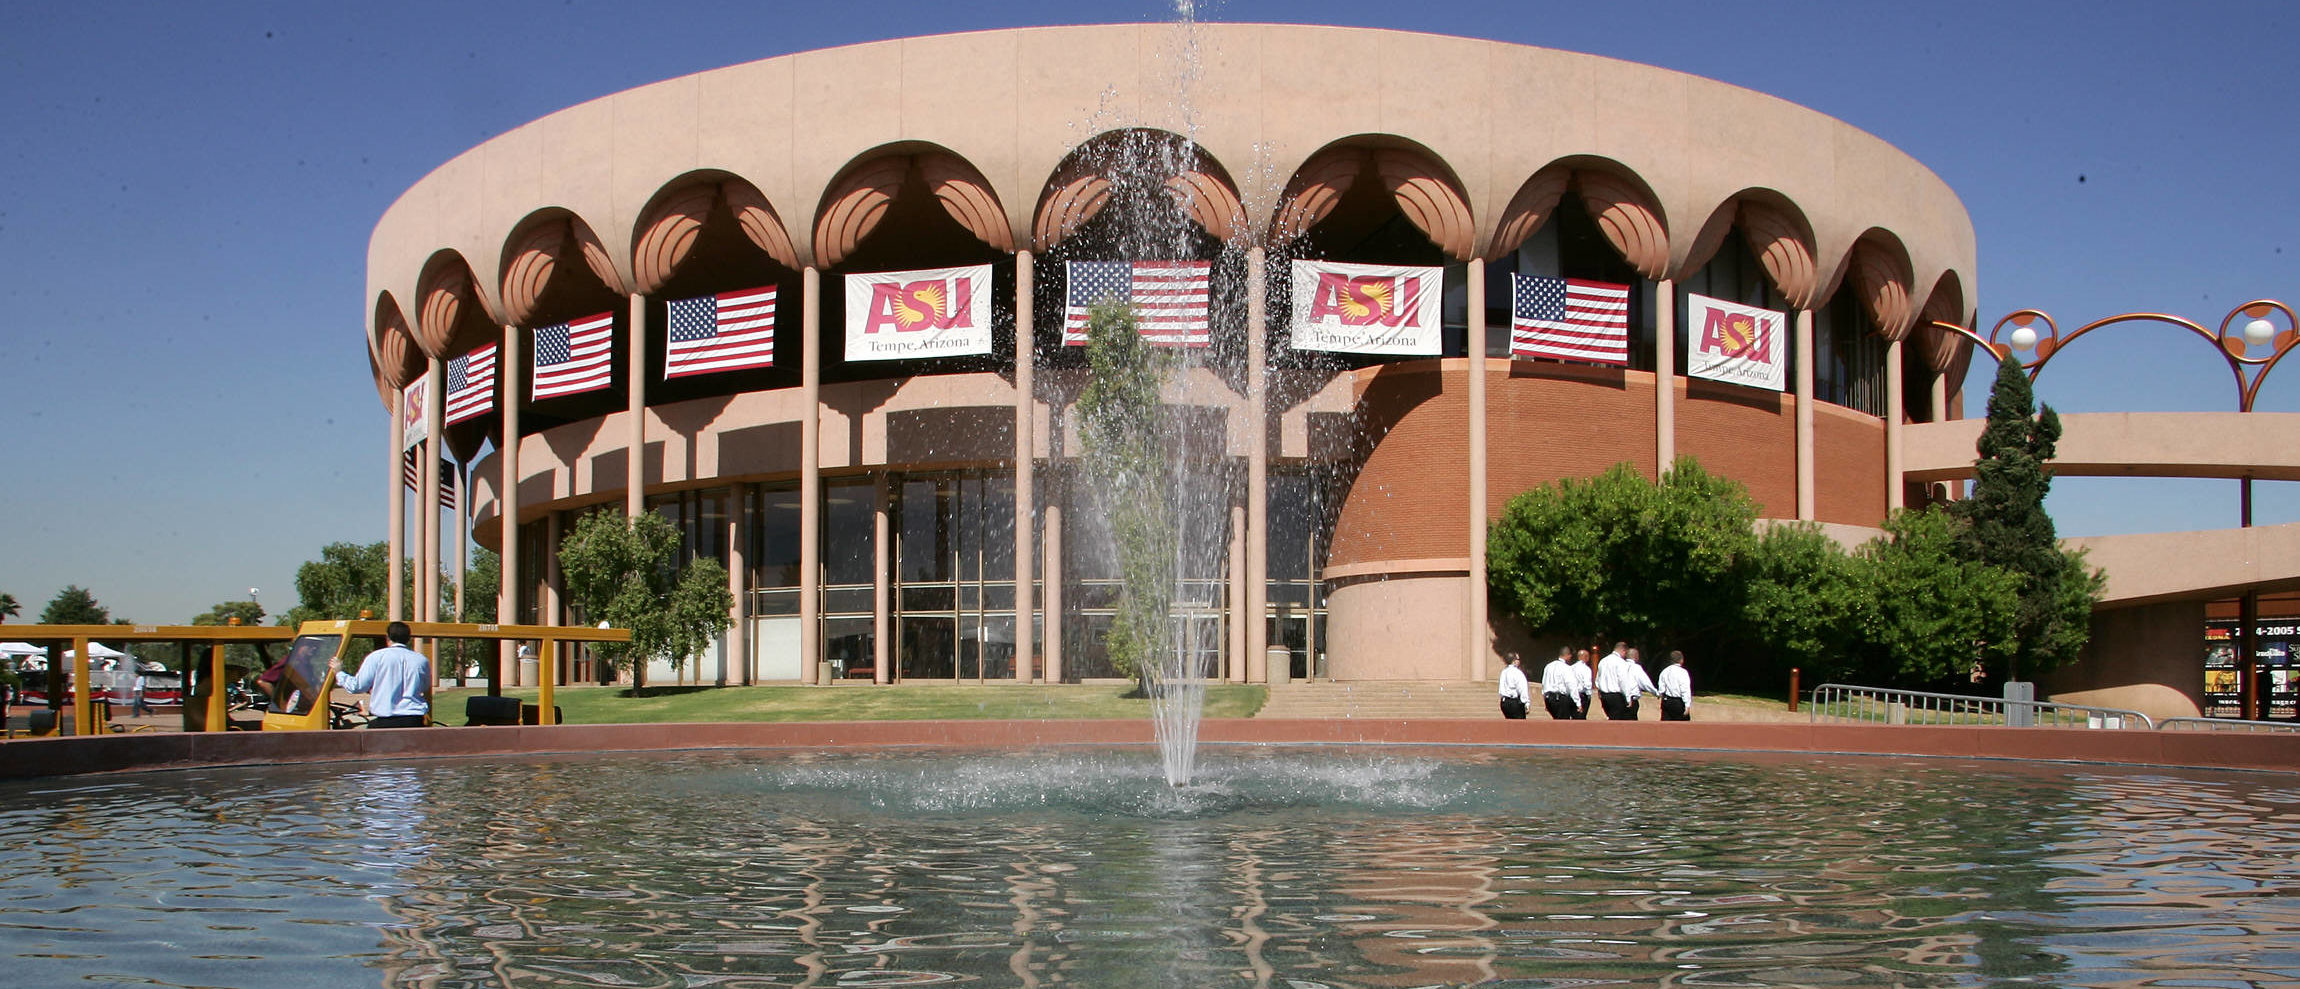 A view of the Gammage Auditorium on the campus of Arizona State University (ASU) 13 October 2004 in Tempe, Az. (Photo by ROBYN BECK/AFP via Getty Images)